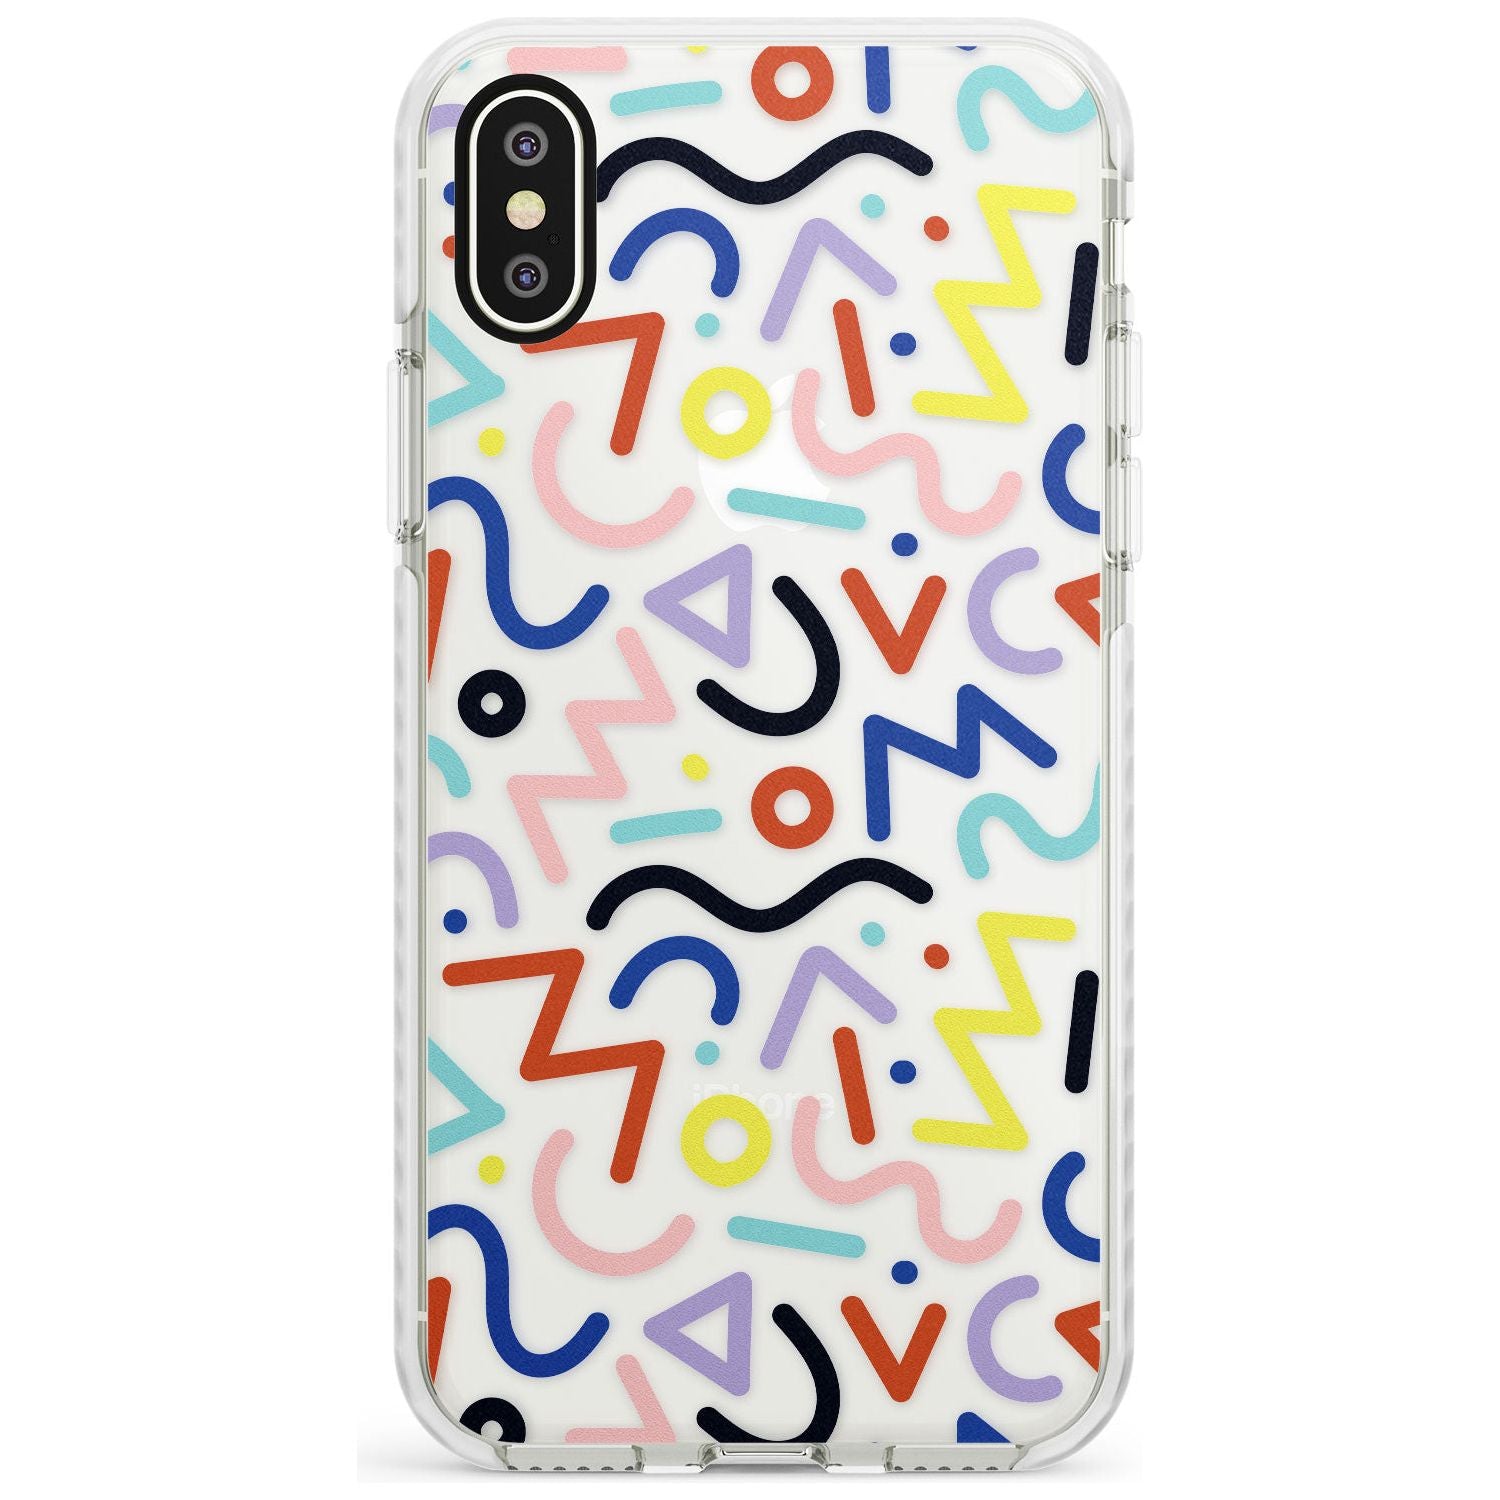 Colourful Squiggles Memphis Retro Pattern Design Impact Phone Case for iPhone X XS Max XR